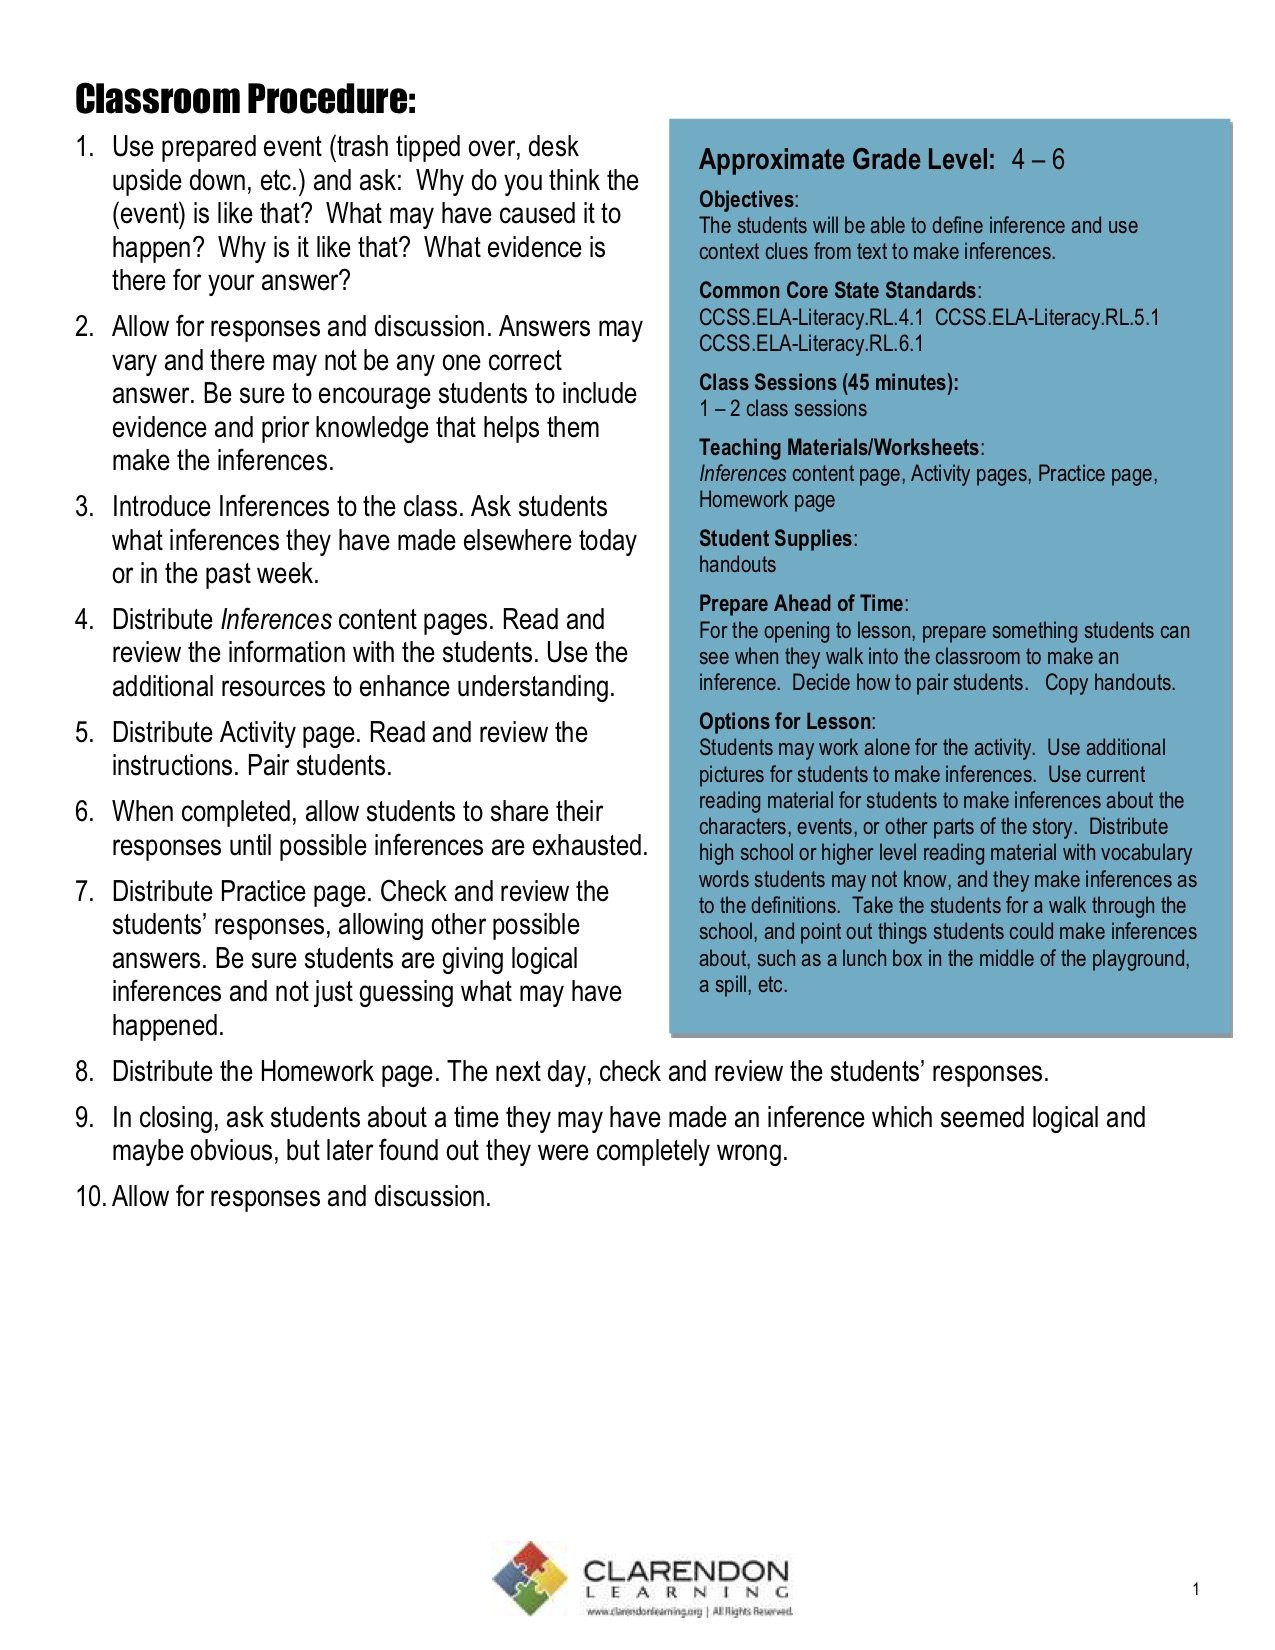 Inference Lesson Plan Inferences Lesson Plan